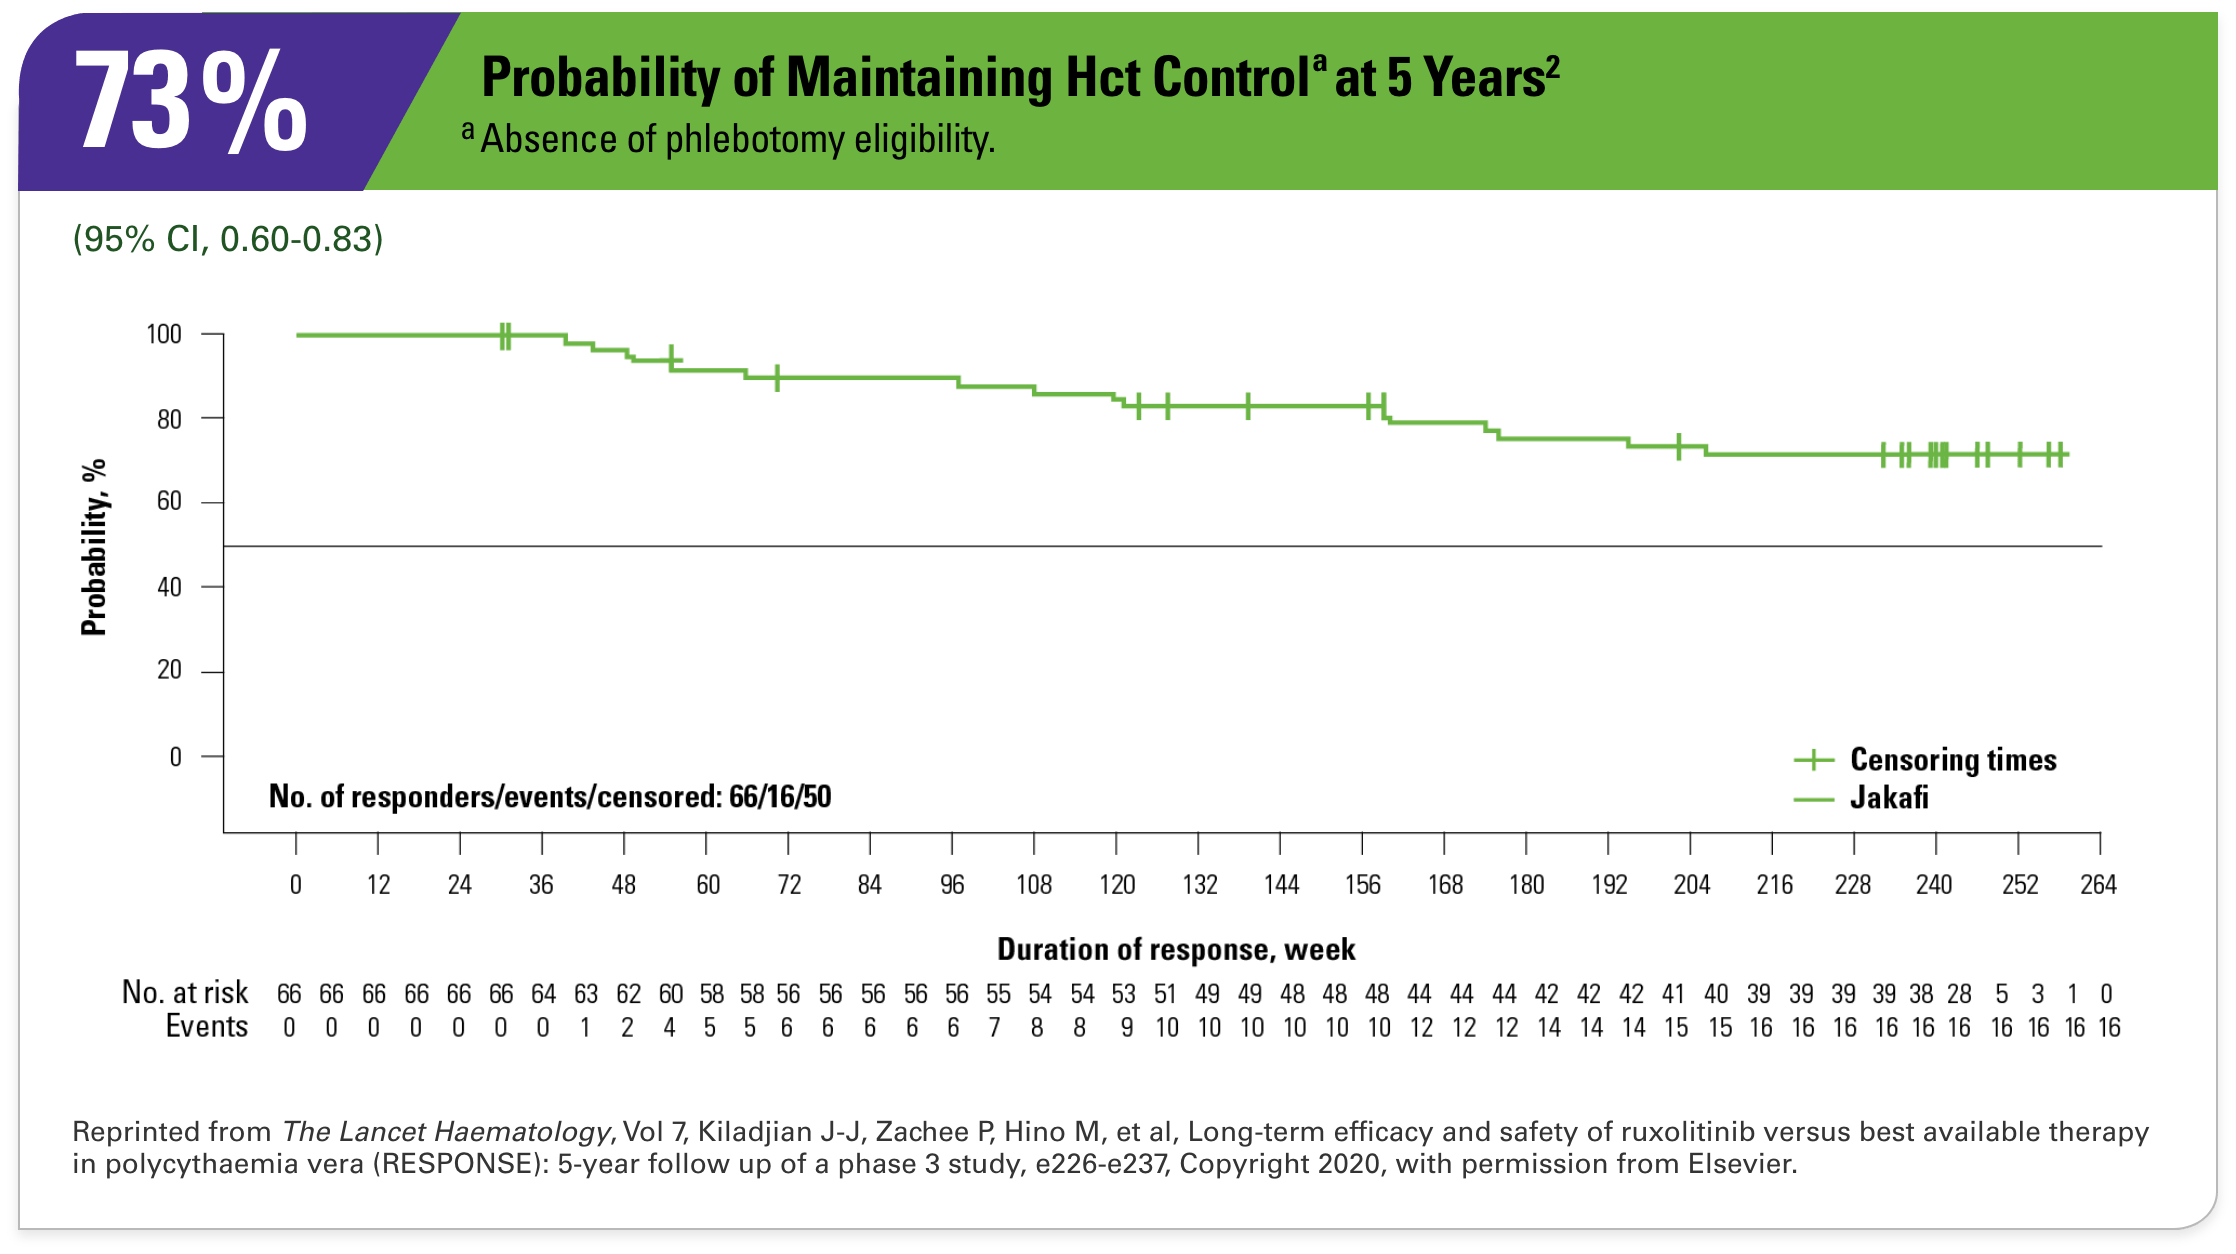 KM curve Hct Control at 5 Years